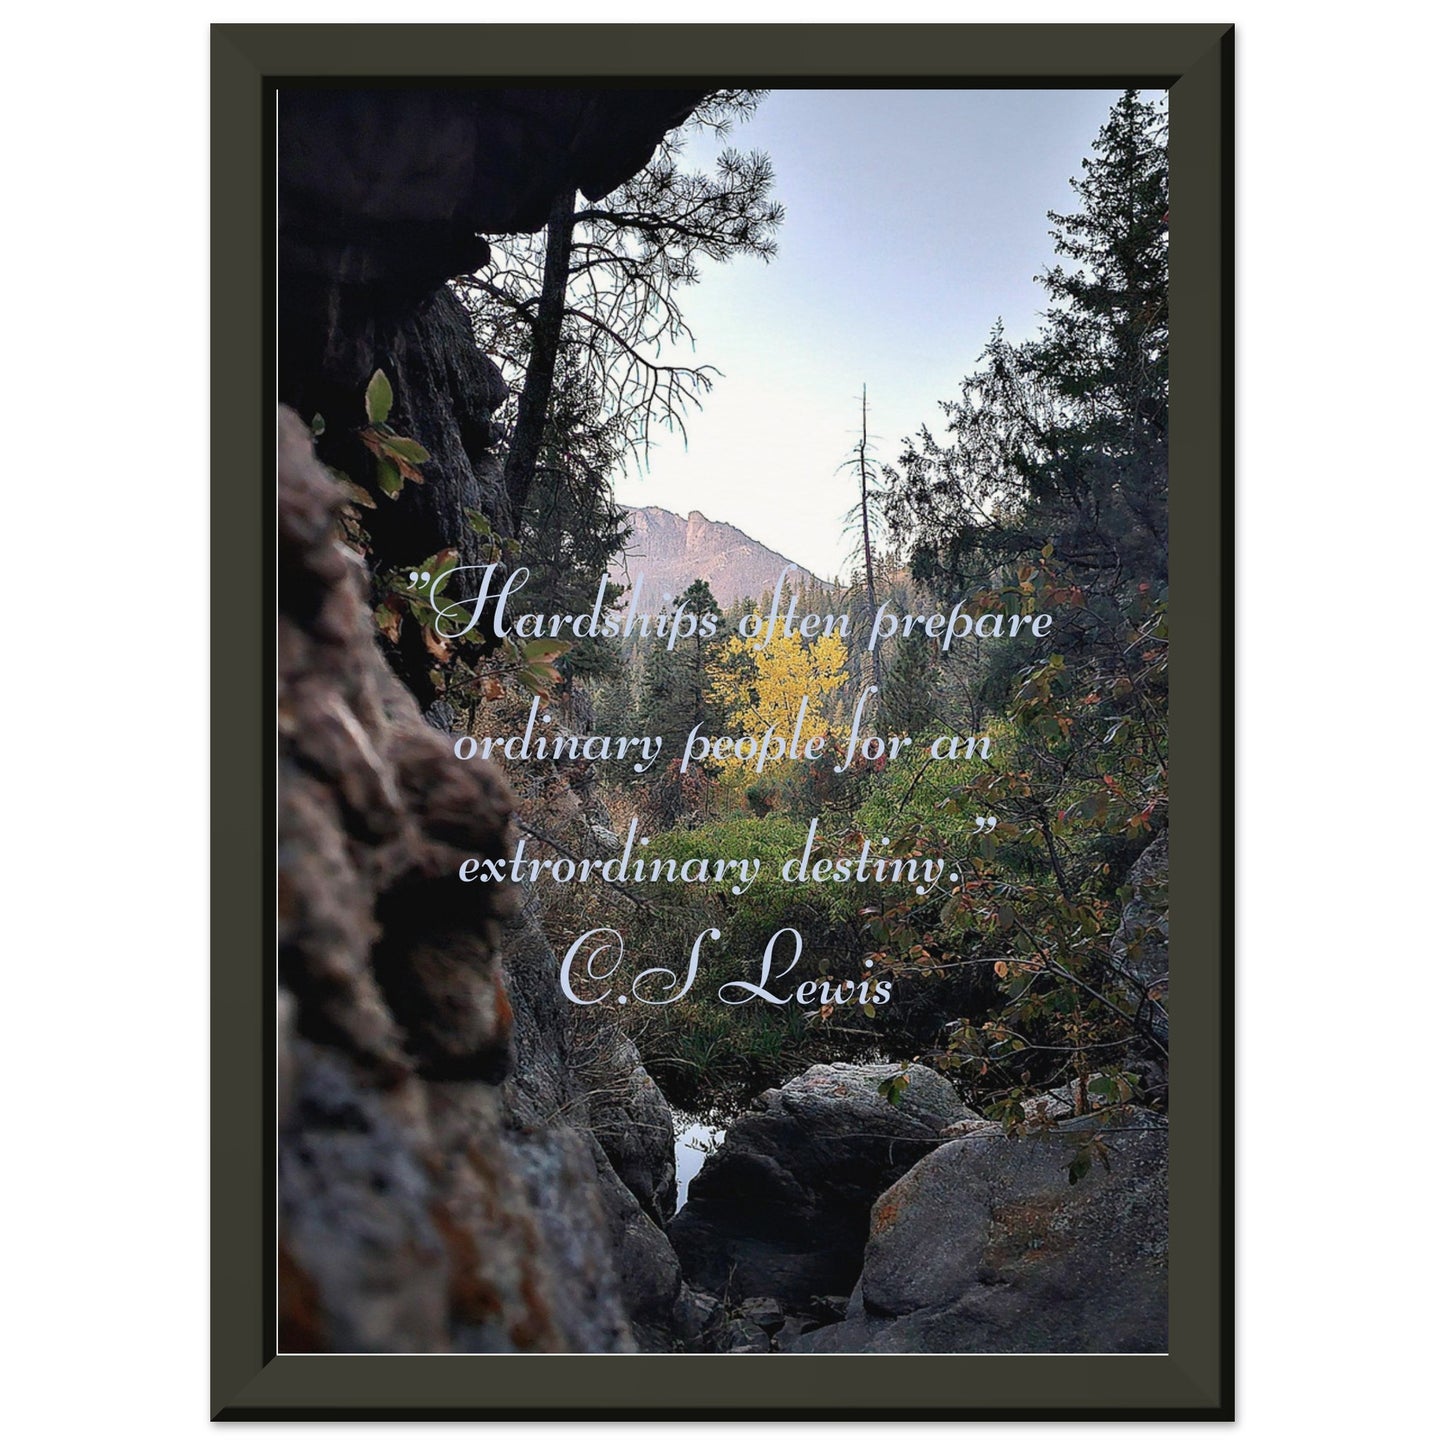 C.S Lweis quote wall art